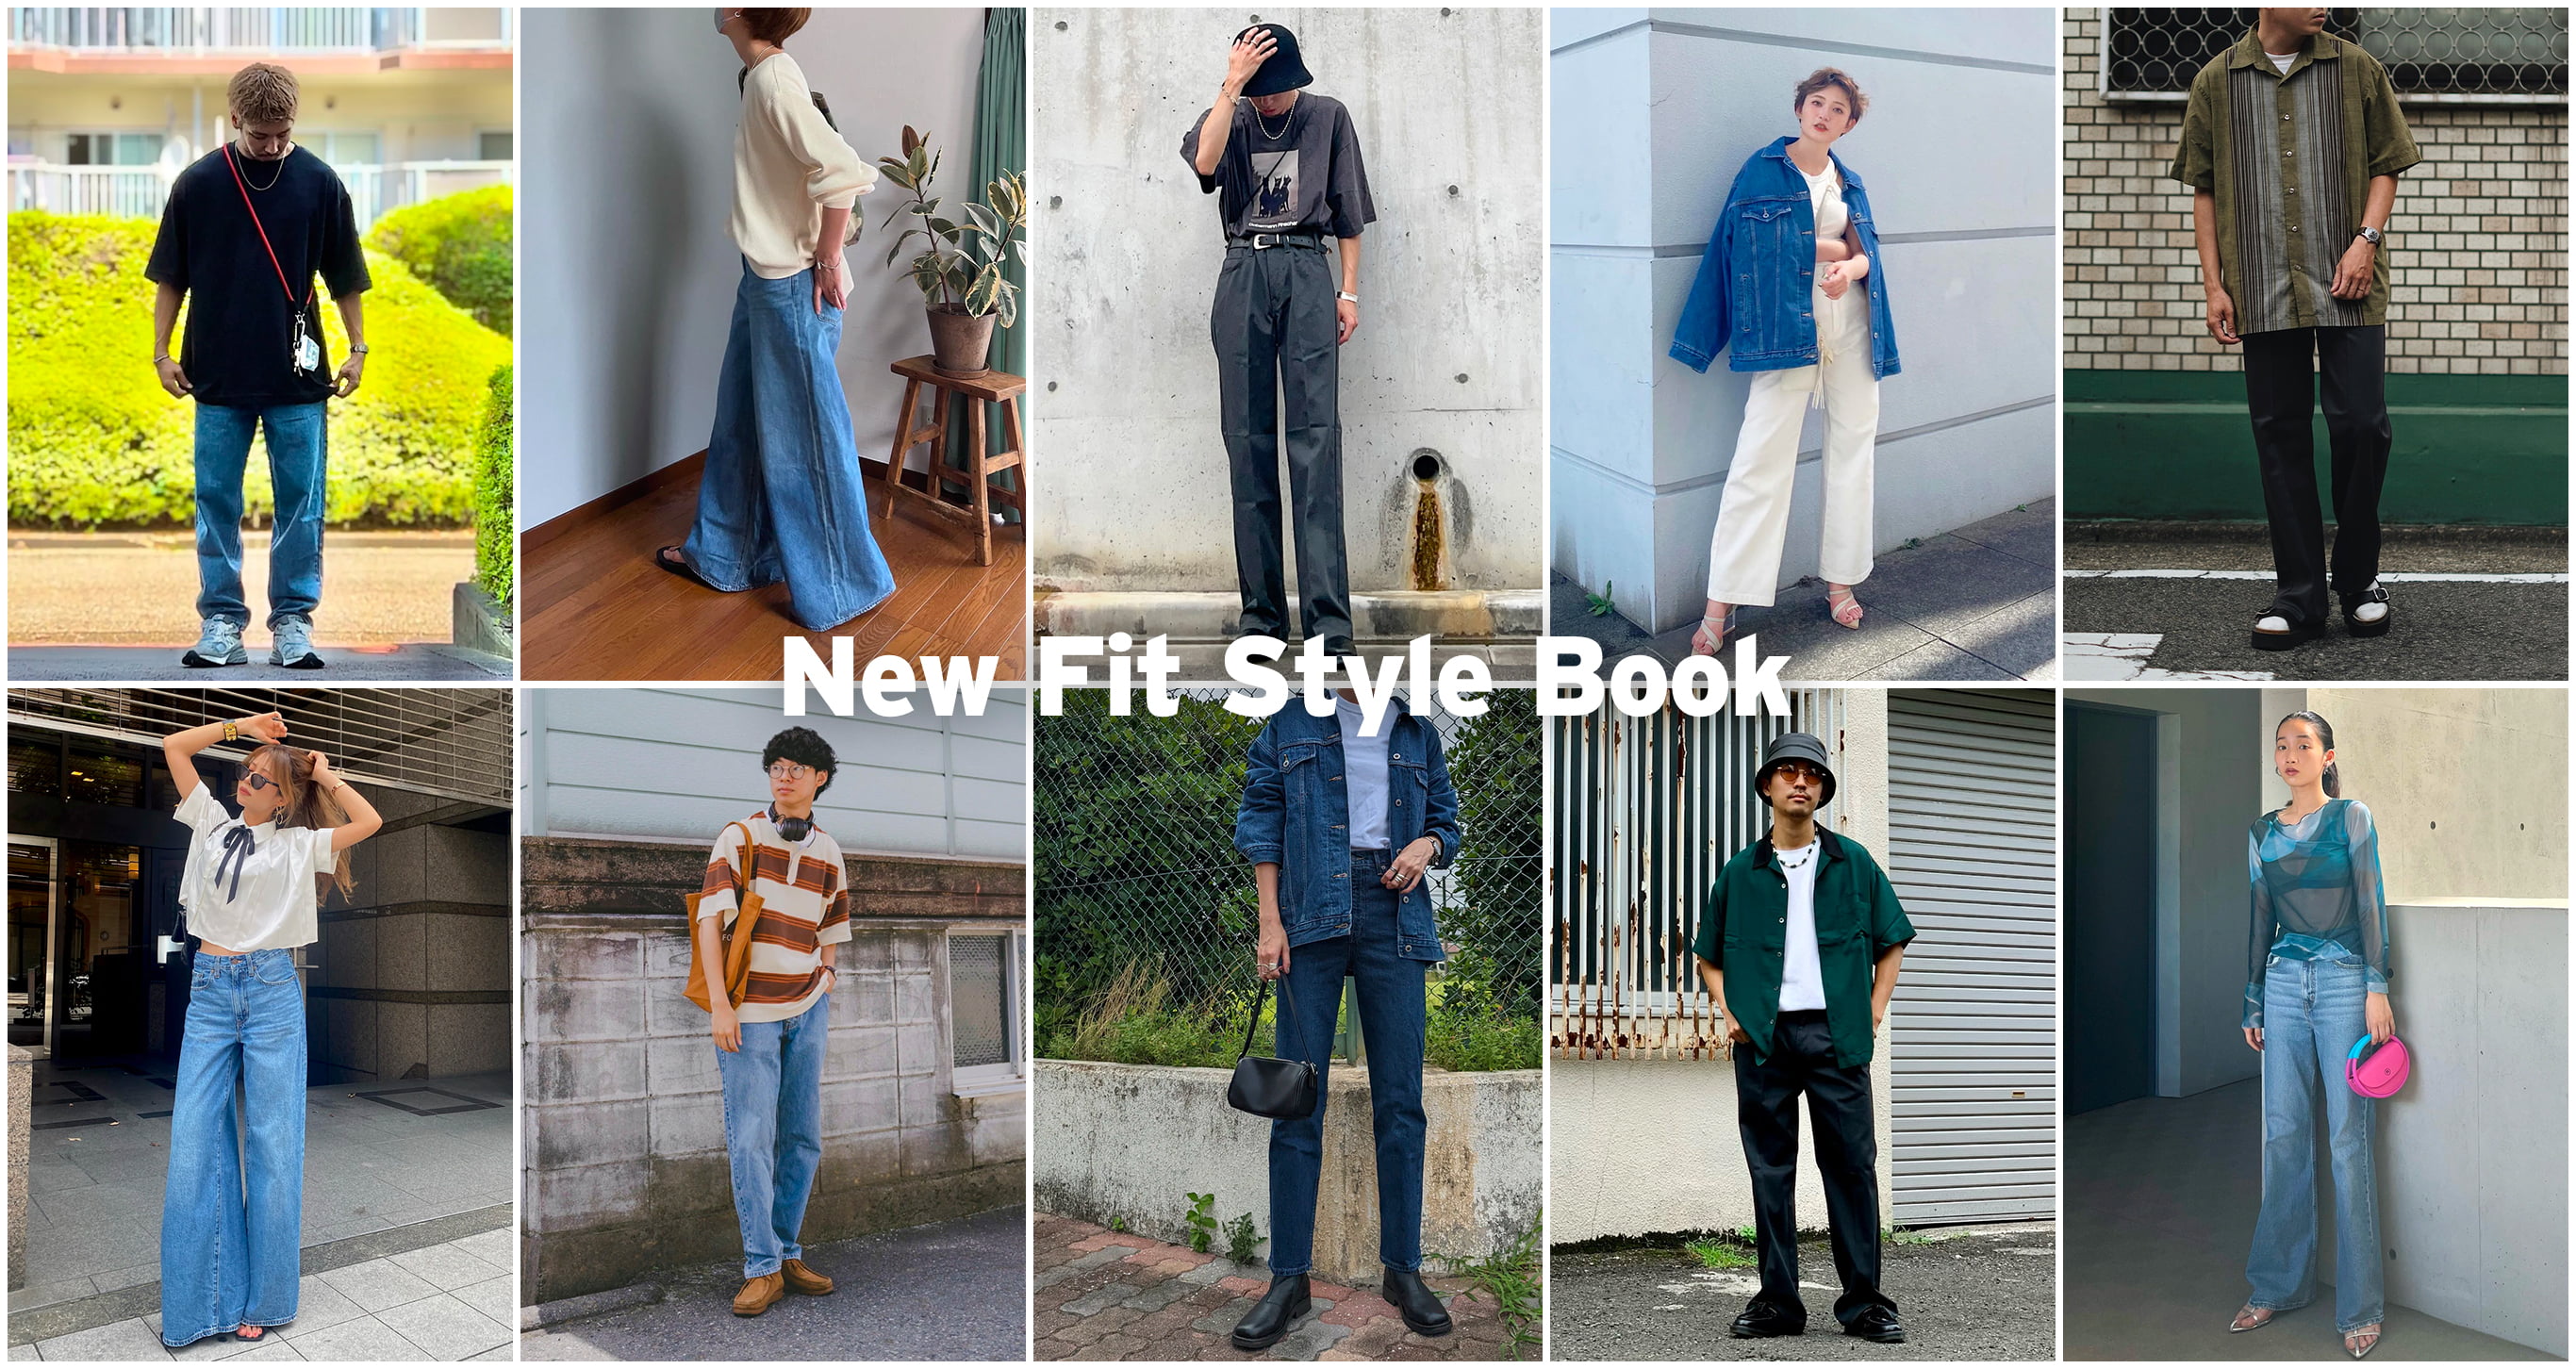 New Fit Style Book